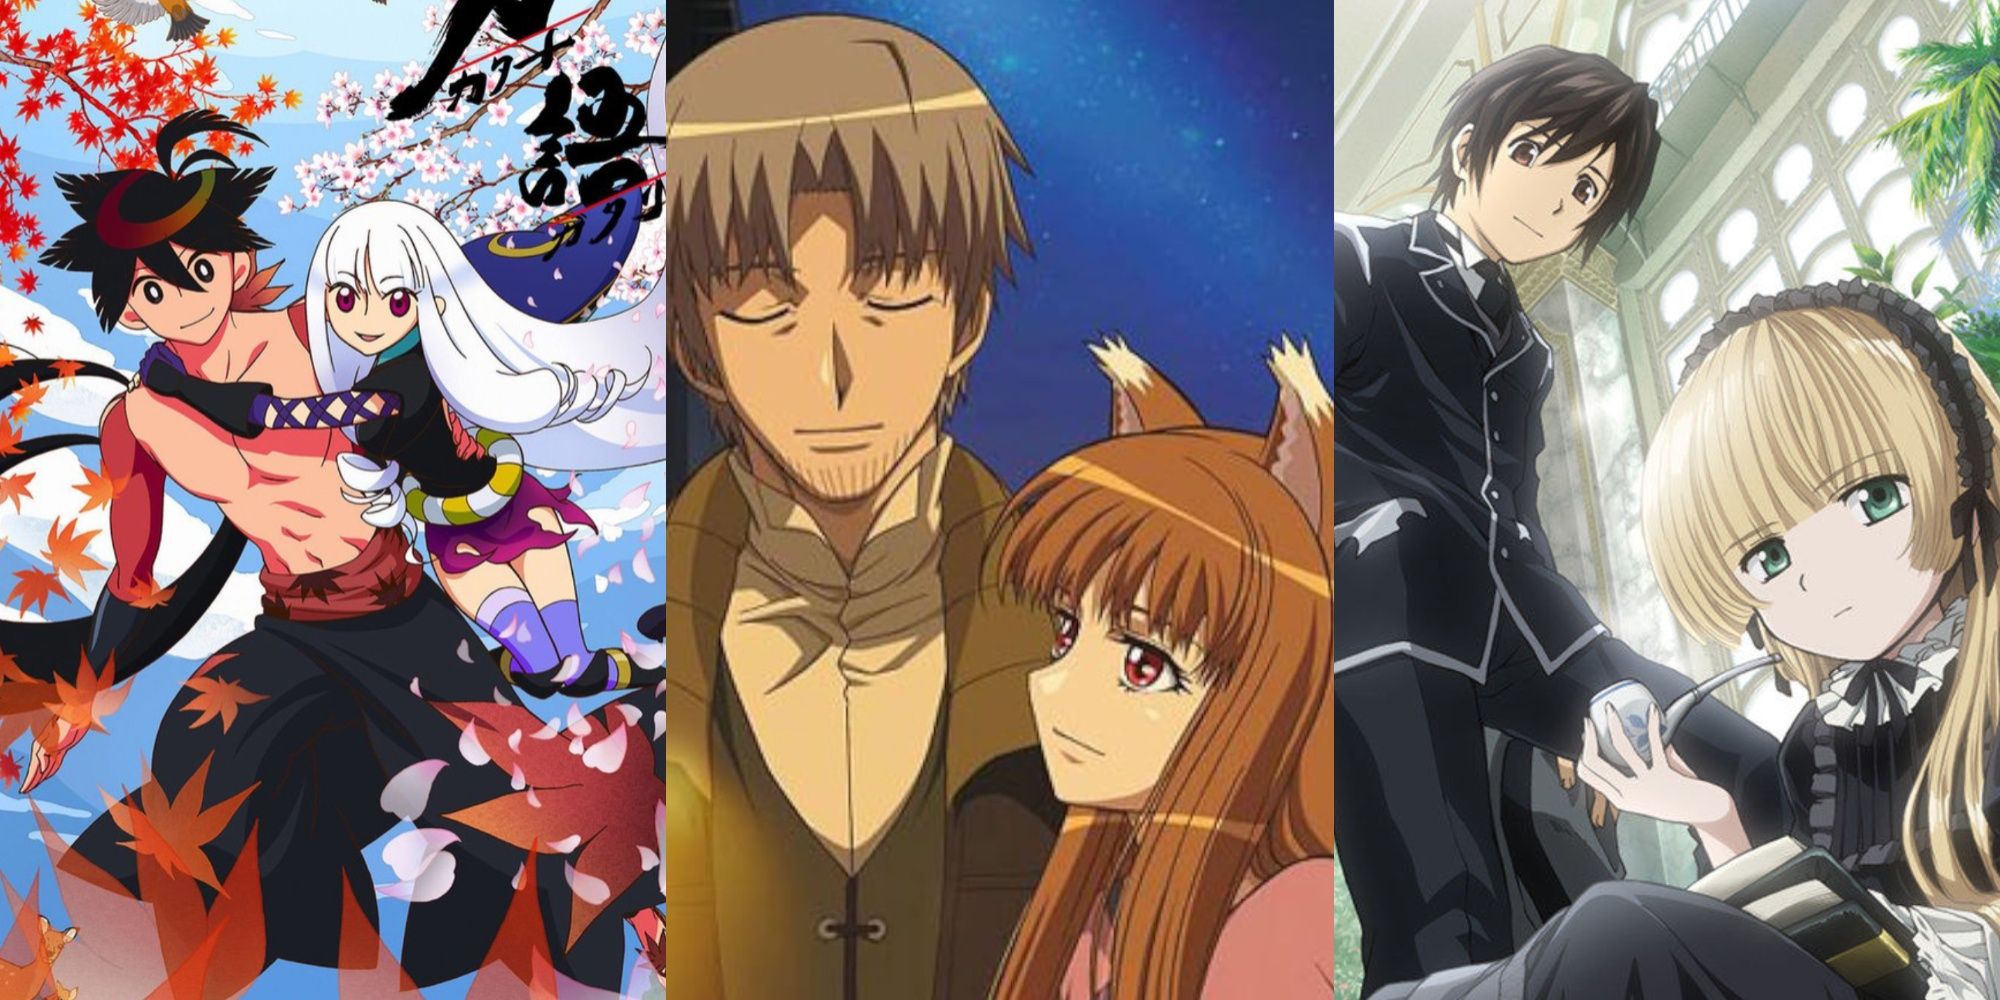 Romance Anime To Watch If You Love Spice and Wolf